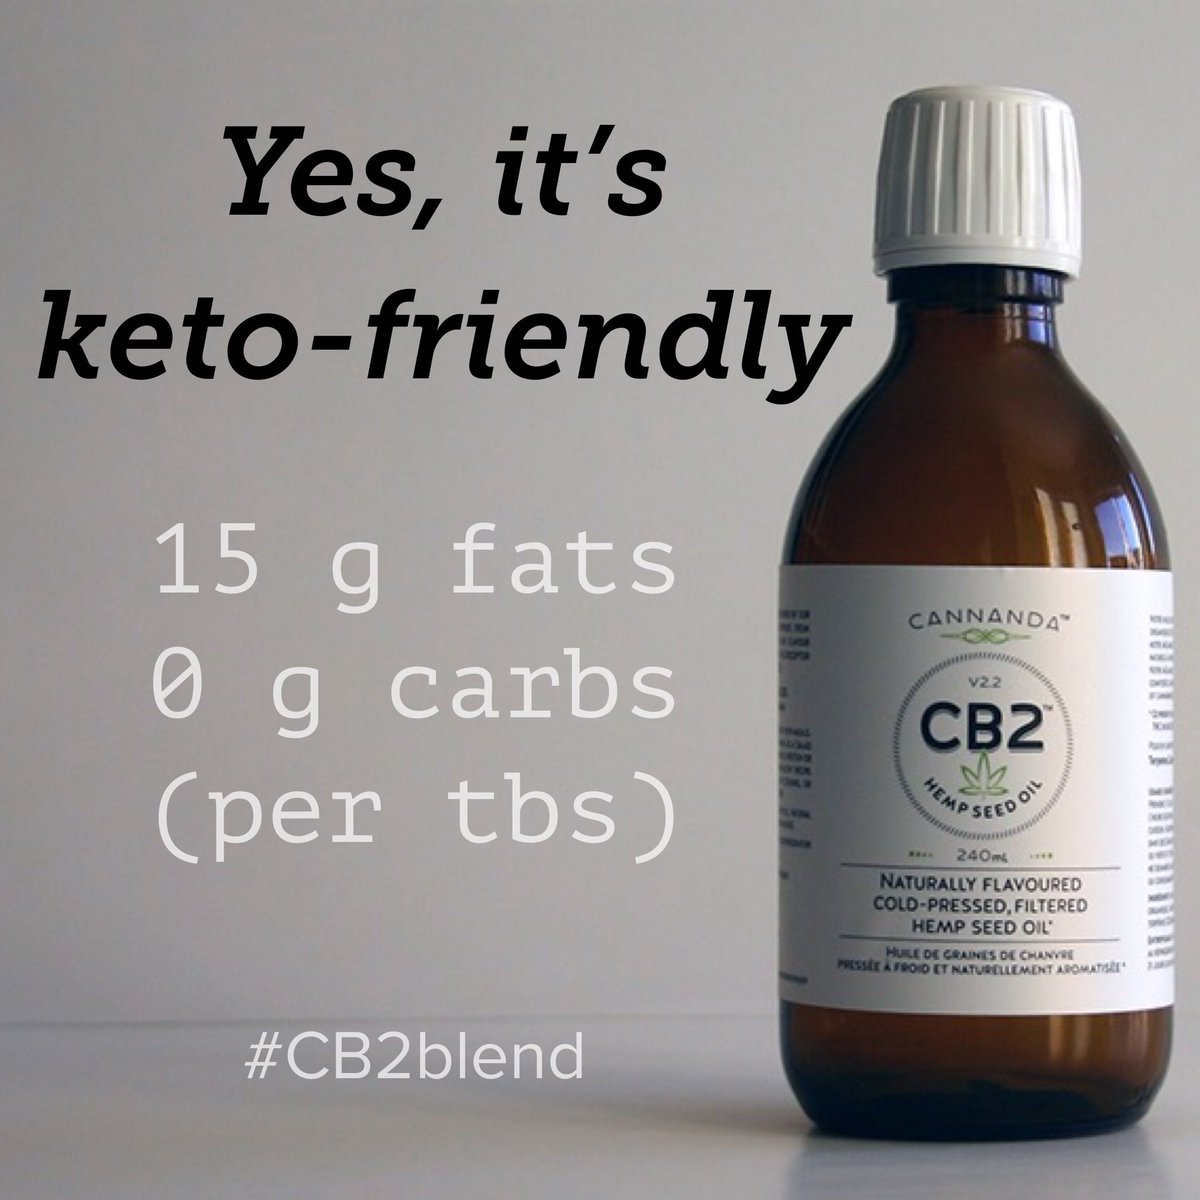 #CB2blend is perfect for use while on a #ketogenic diet or #NutritionalKetosis program
—
#ketosis #HFLC #weightloss #cancer #alzheimers #diabetes